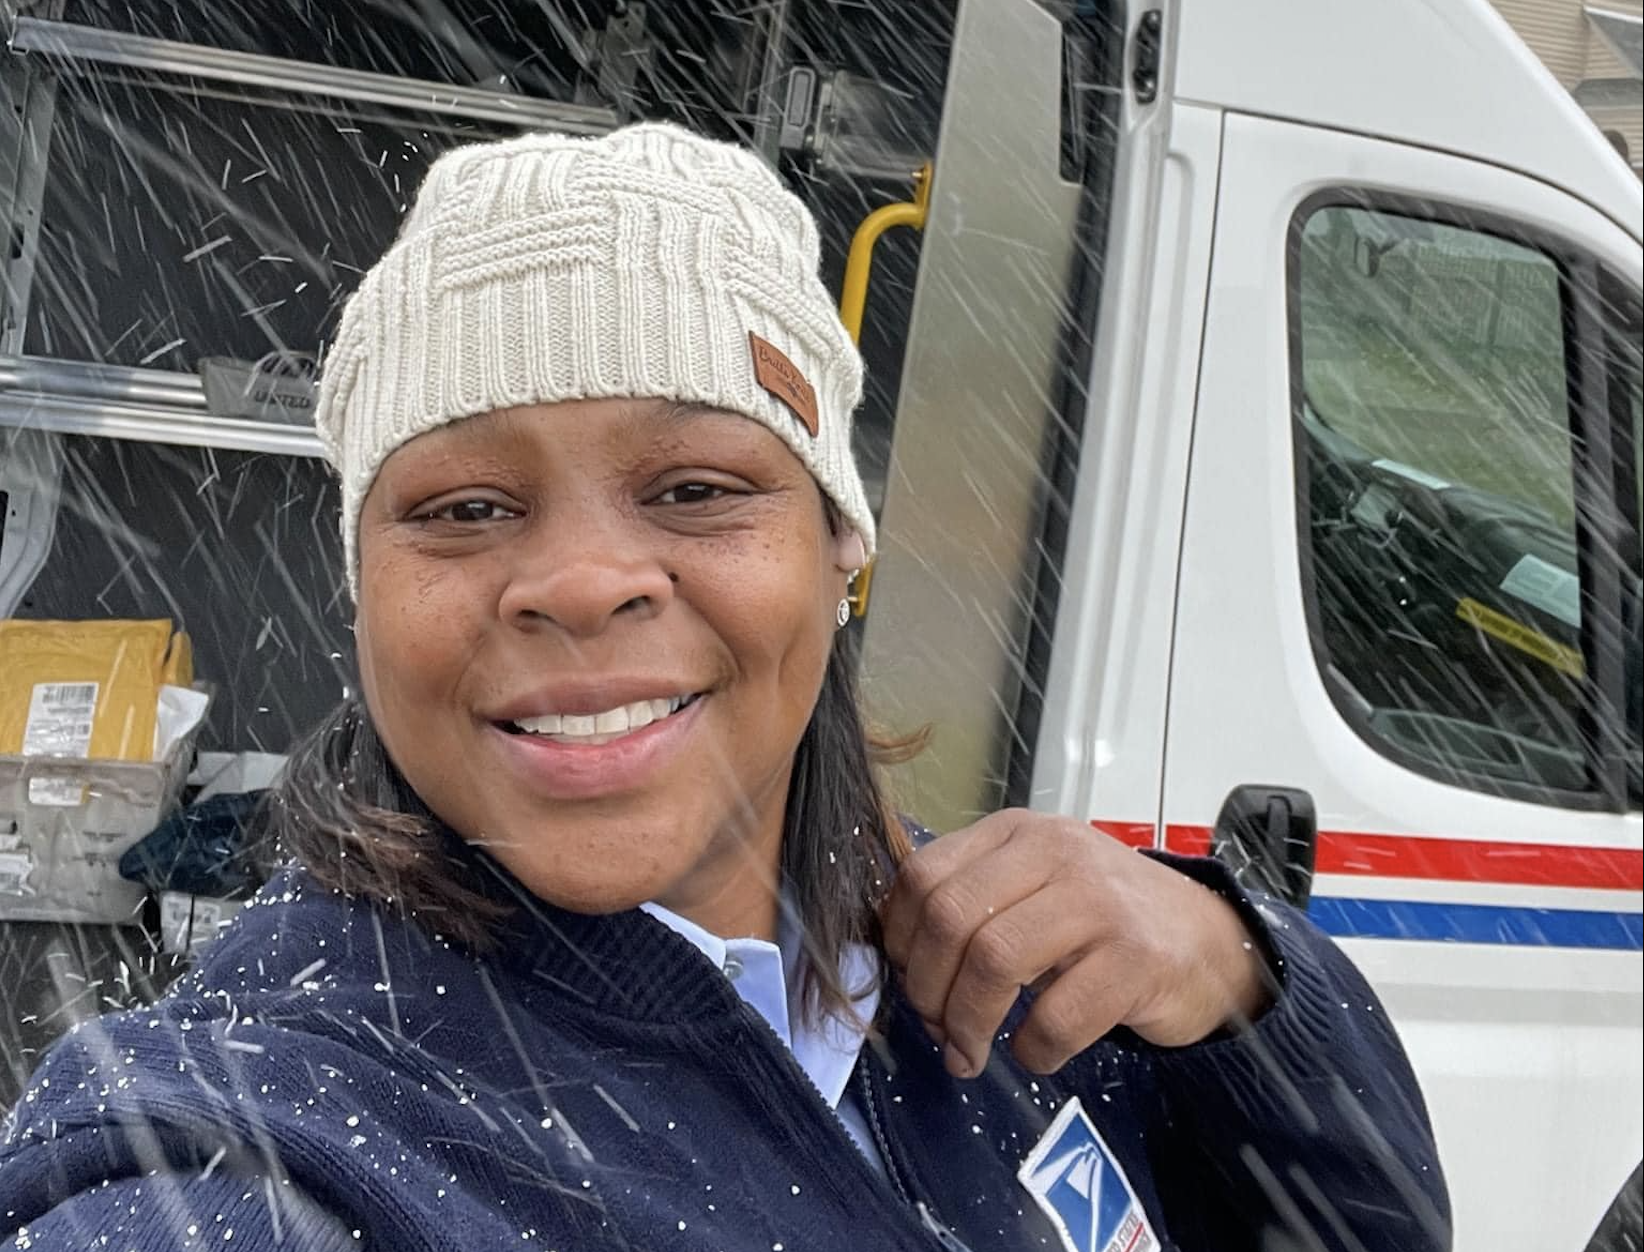 After letter carrier's slaying, coworkers say Postal Service is failing to deliver on safety